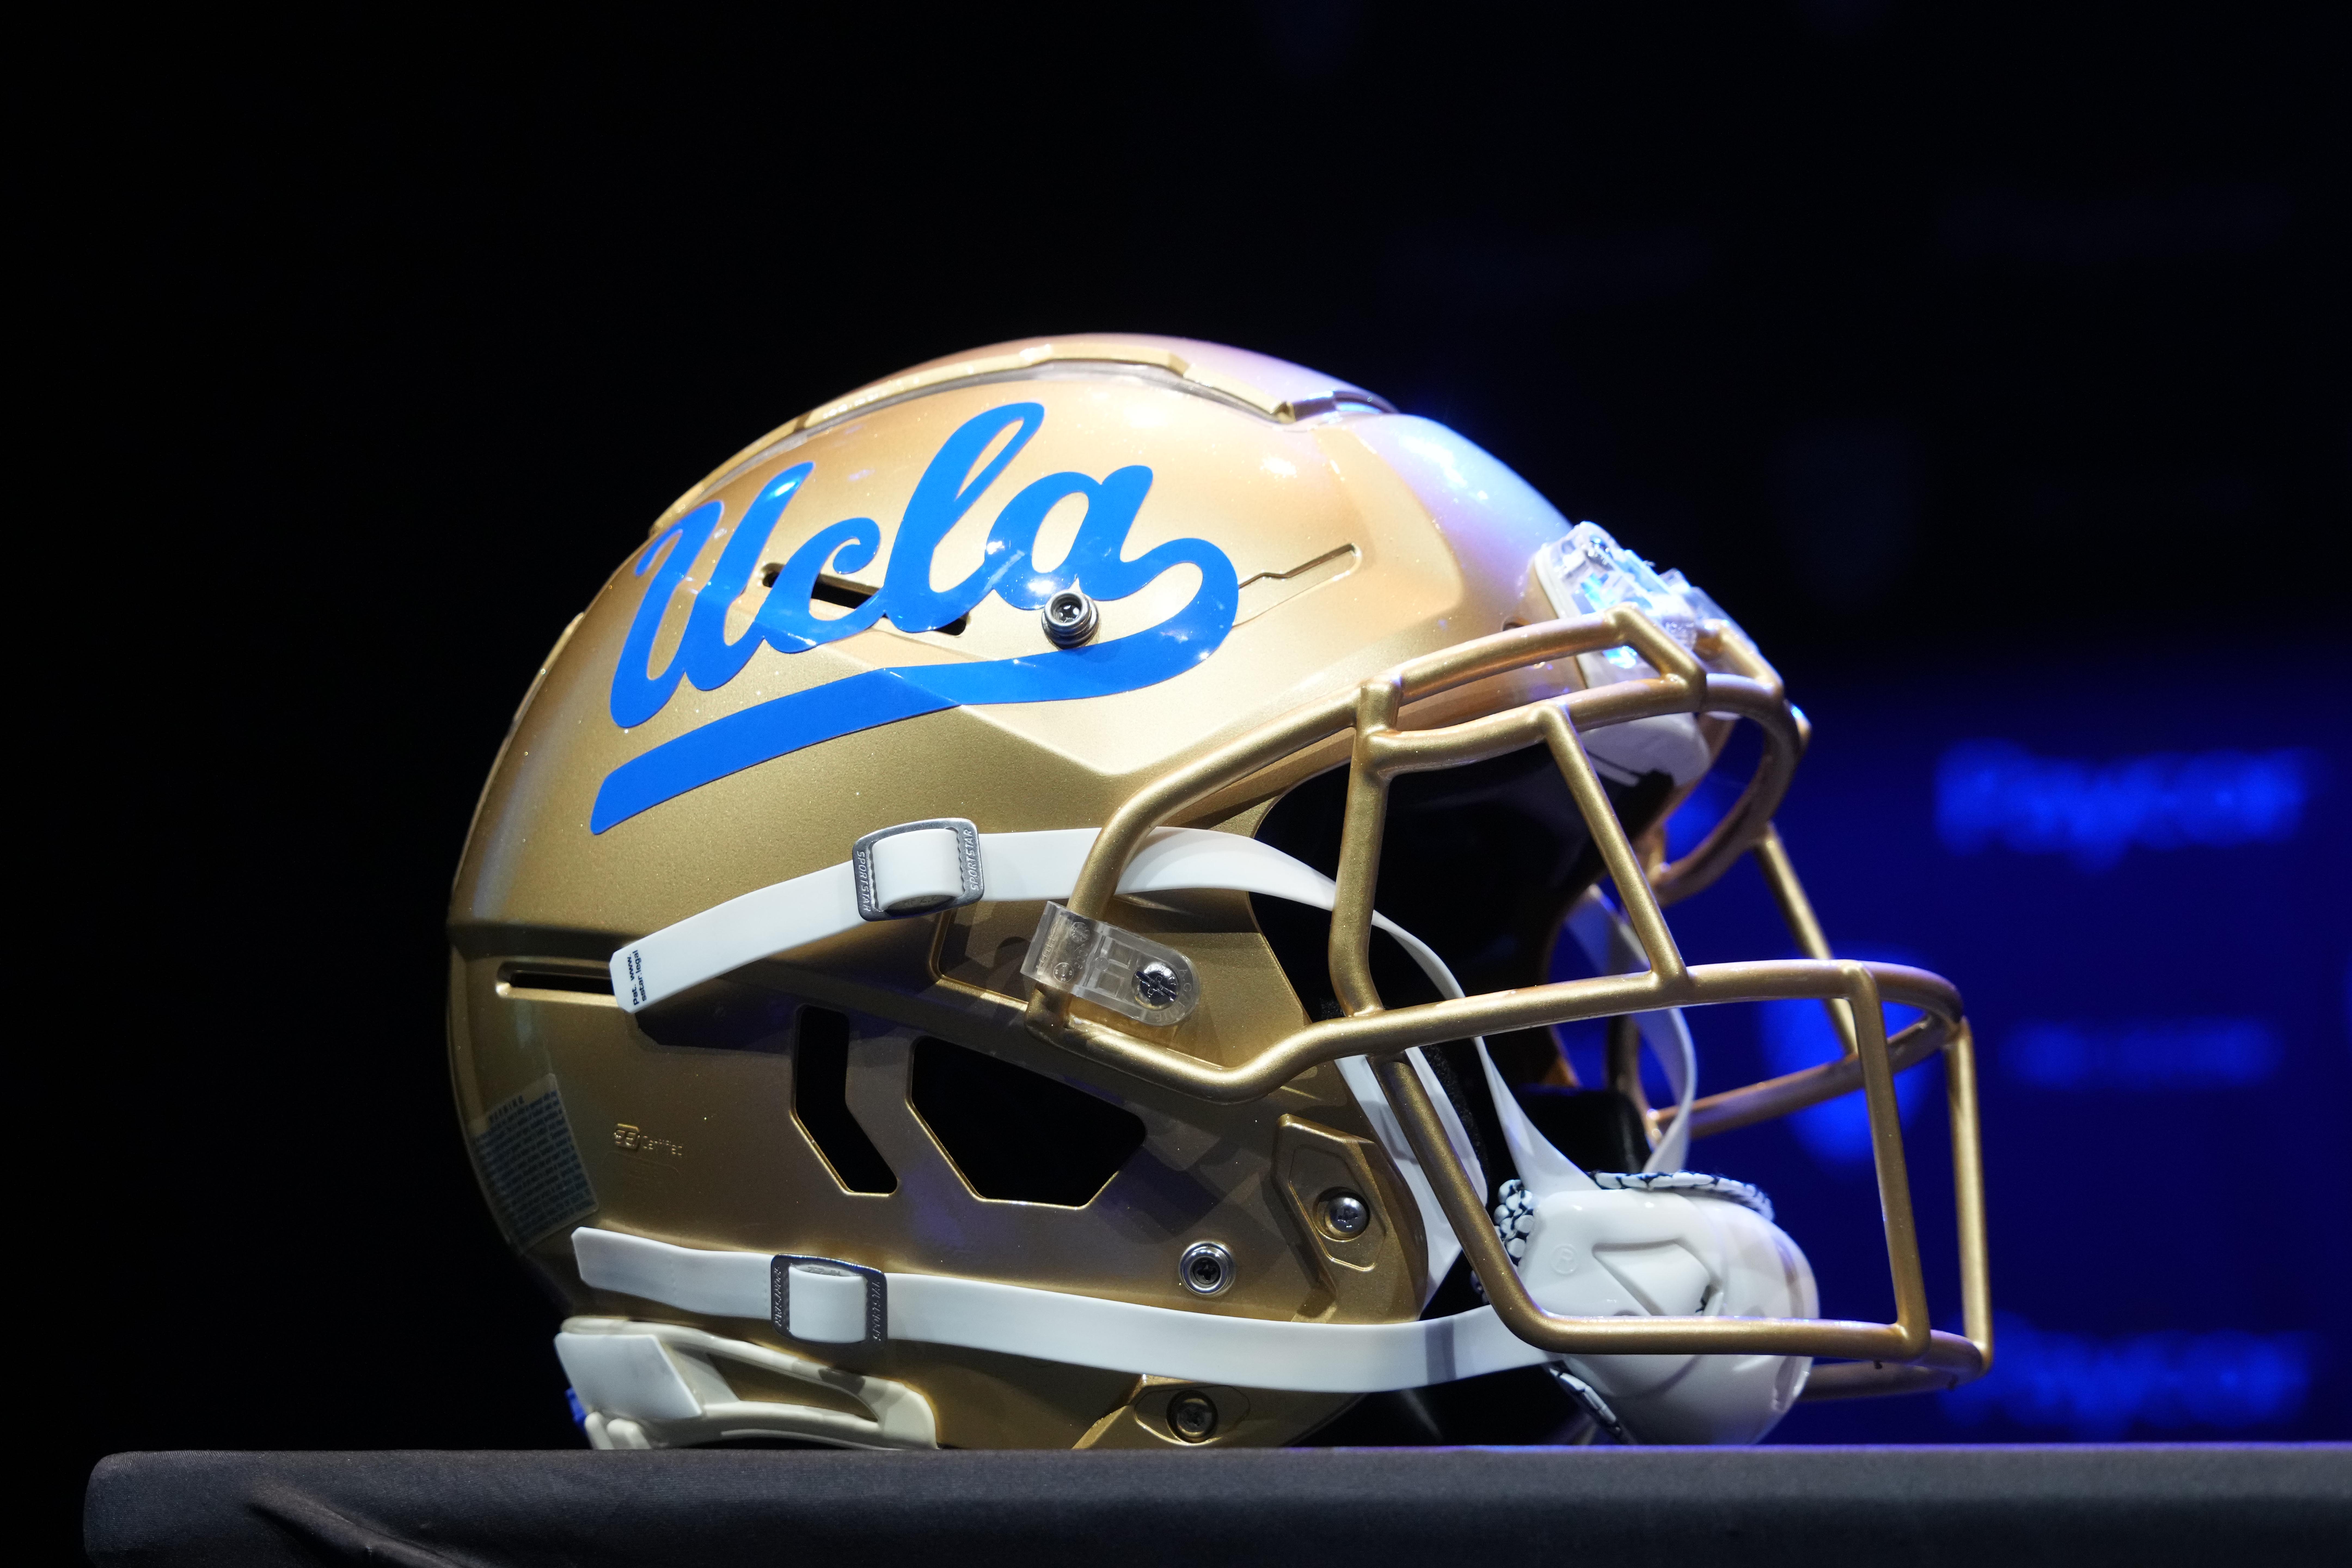 UCLA Bruins Game Today: TV Schedule, Channel, And More - LAFB Network